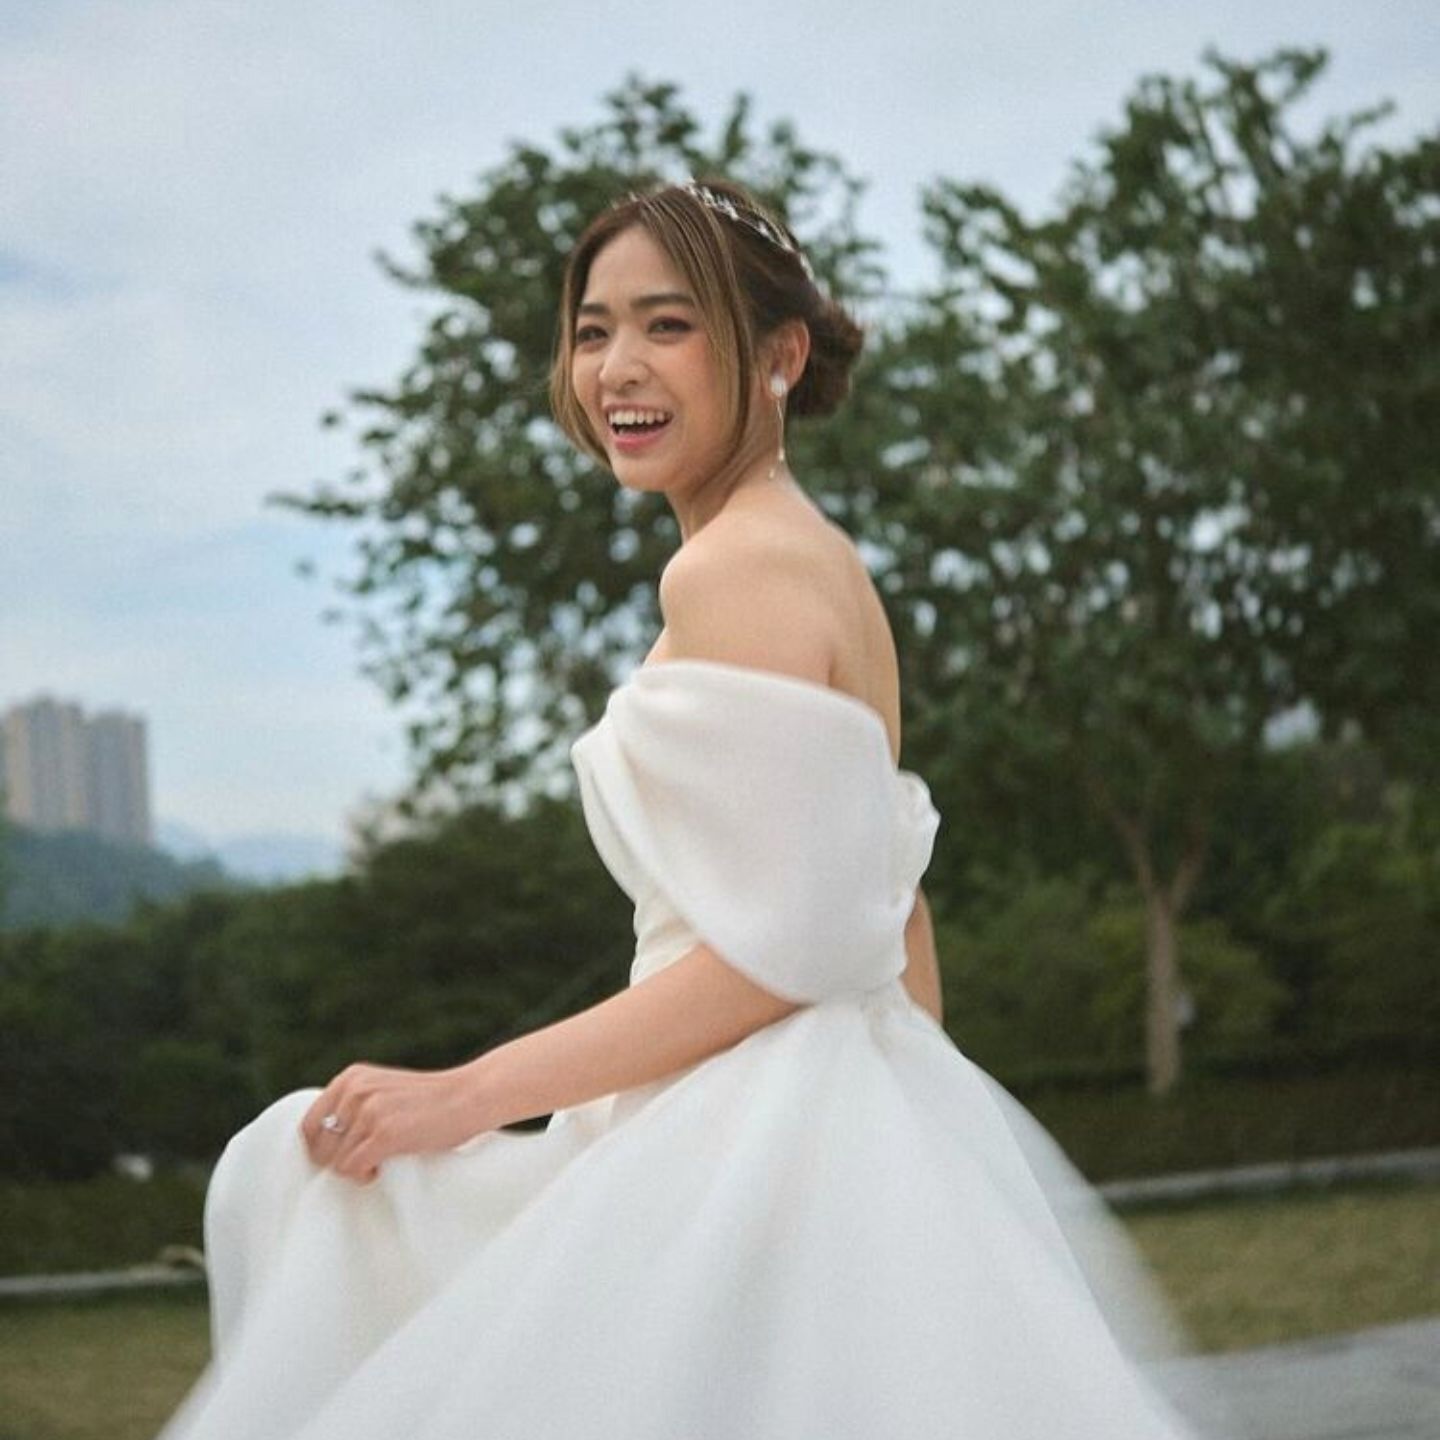 Wedding Dress Rental In Hong Kong: Where To Rent A Bridal Gown